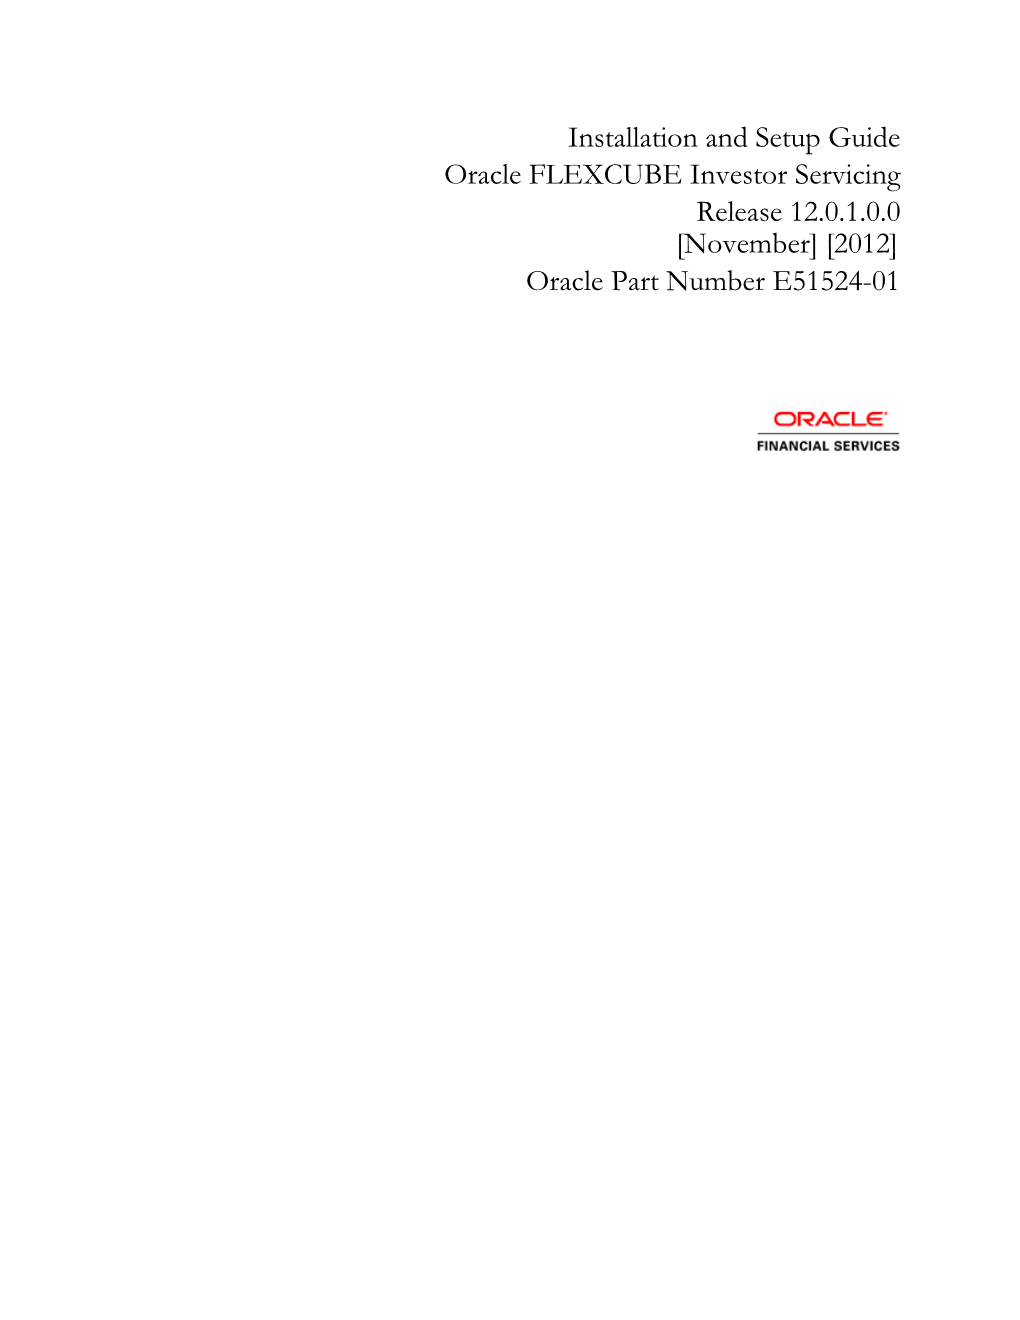 Installation and Setup Guide Oracle FLEXCUBE Investor Servicing